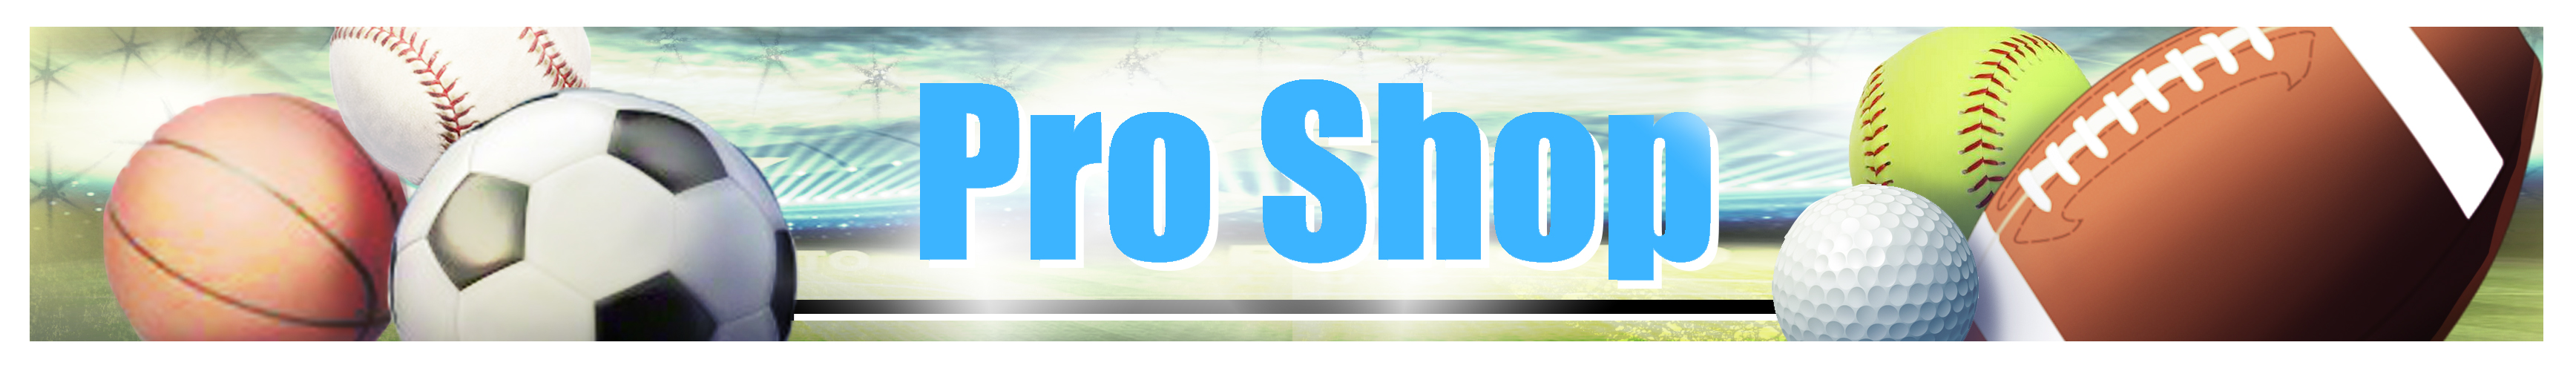 Store Banner Image